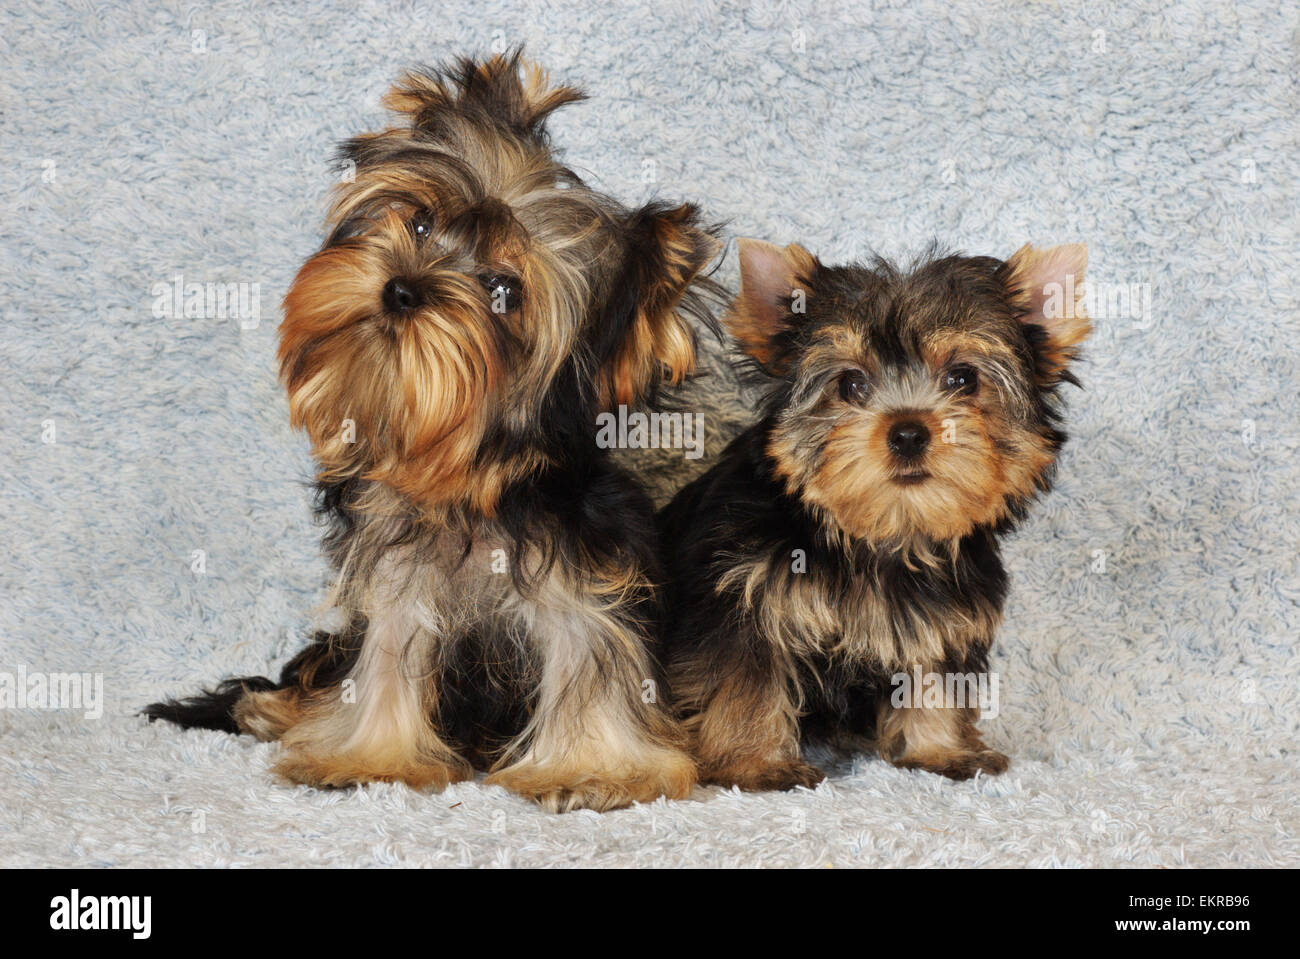 YORKSHIRE TERRIER GLOSSY POSTER PICTURE PHOTO yorkie dog puppy puppies cute 218